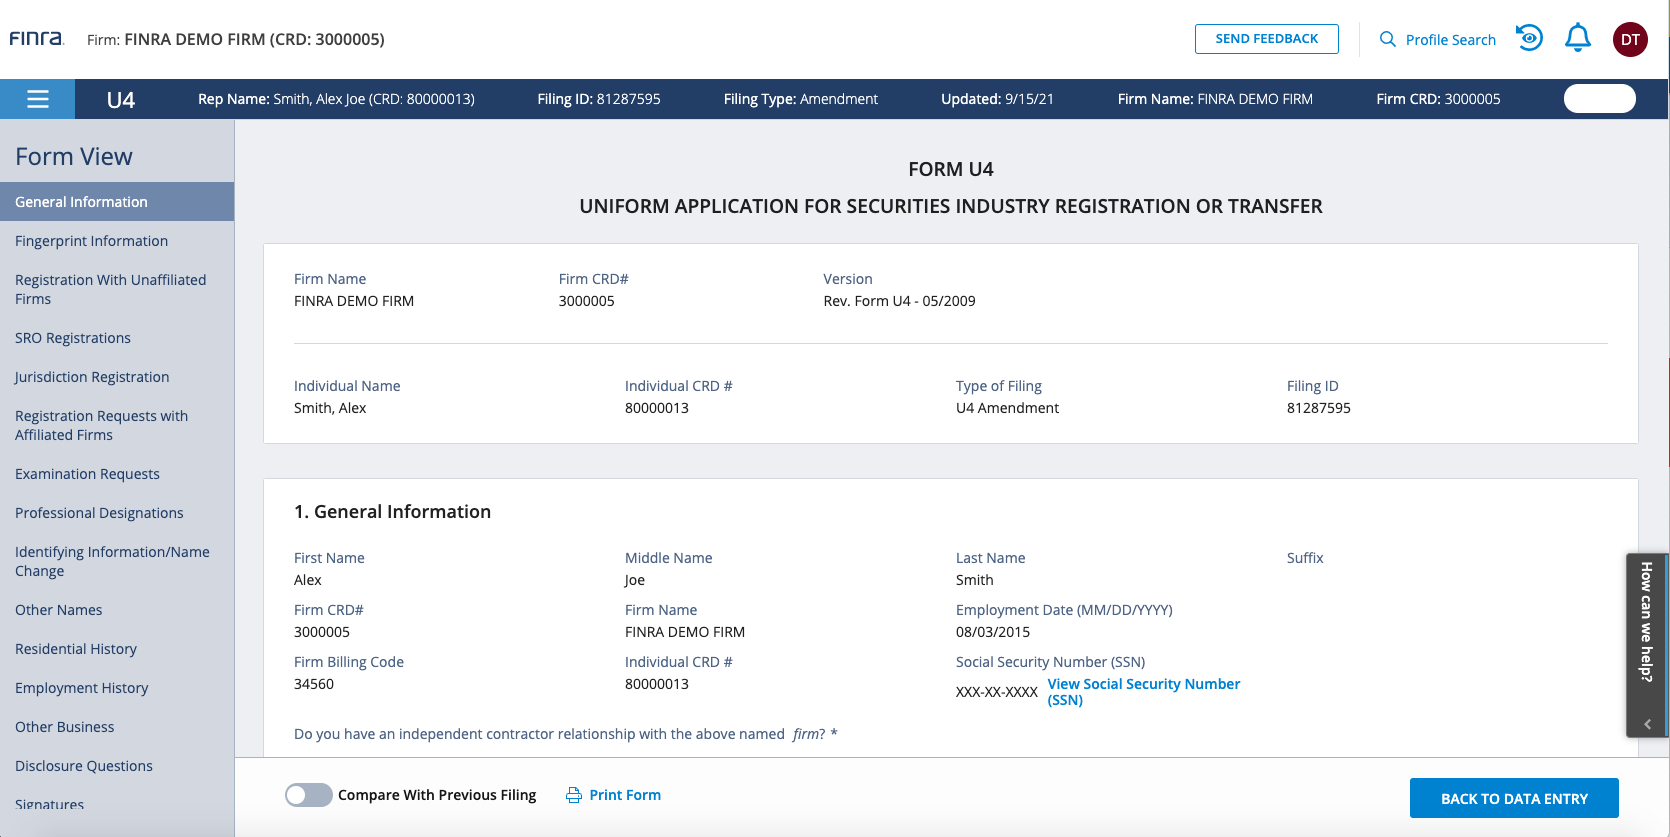 Firm Settings Guide: Reviewing the Form View Prior to Filing Submission